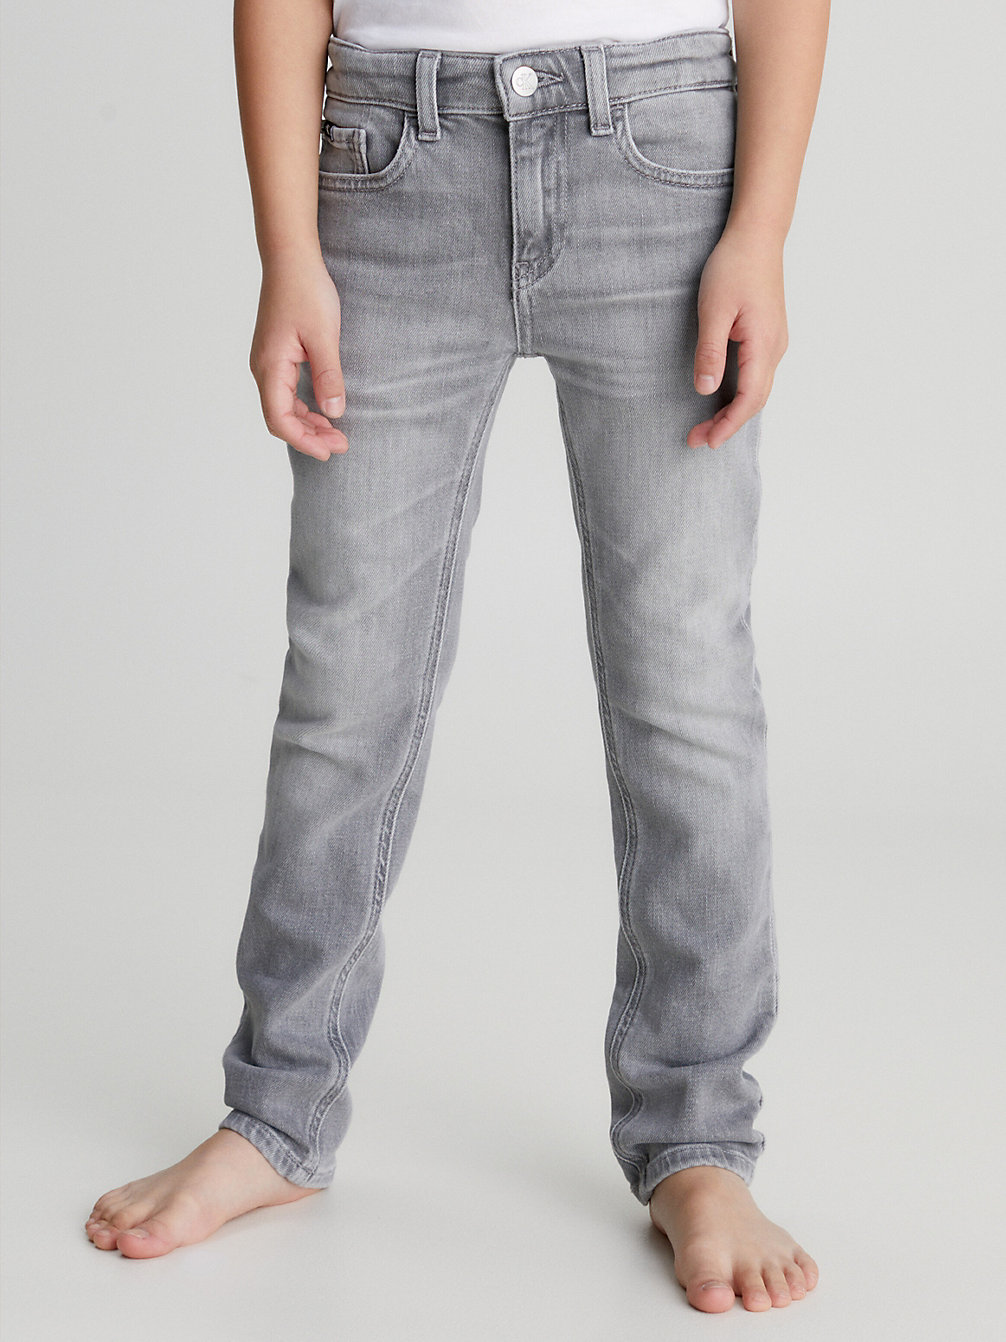 LIGHT GREY > Jeansy Mid Rise Slim > undefined boys - Calvin Klein